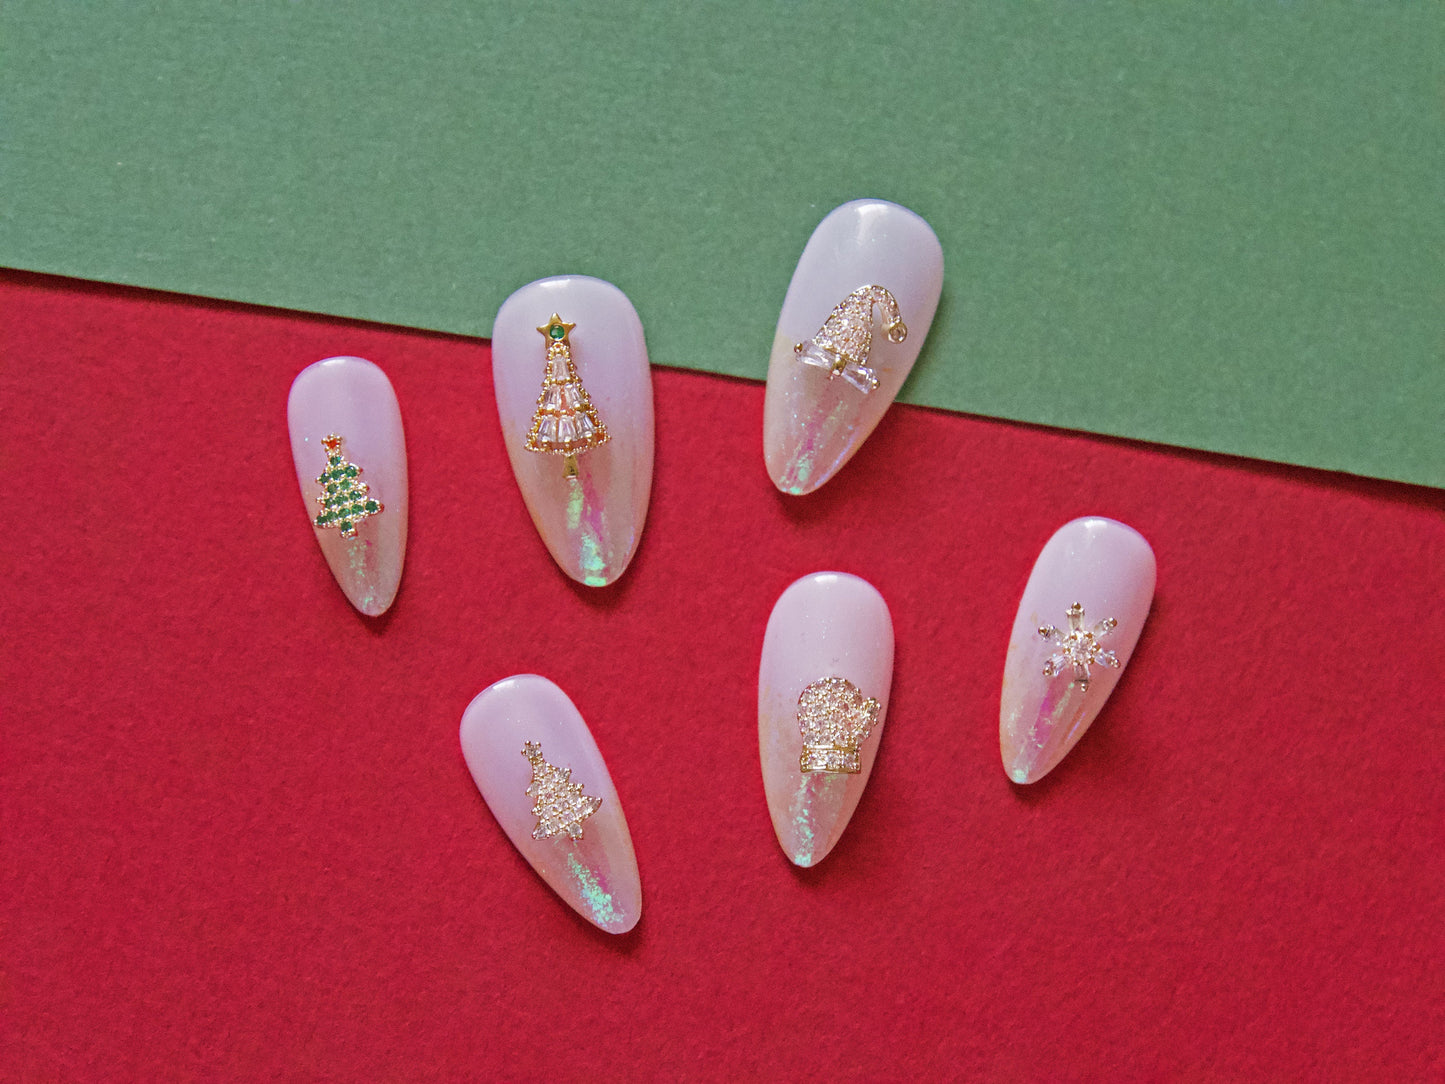 14k Gold Plated Christmas Tree Nail Decal/ Merry Christmas Festive Delight Zircon Nails Ornaments Jewelry/ Glove Snow Hat Trees Manicure